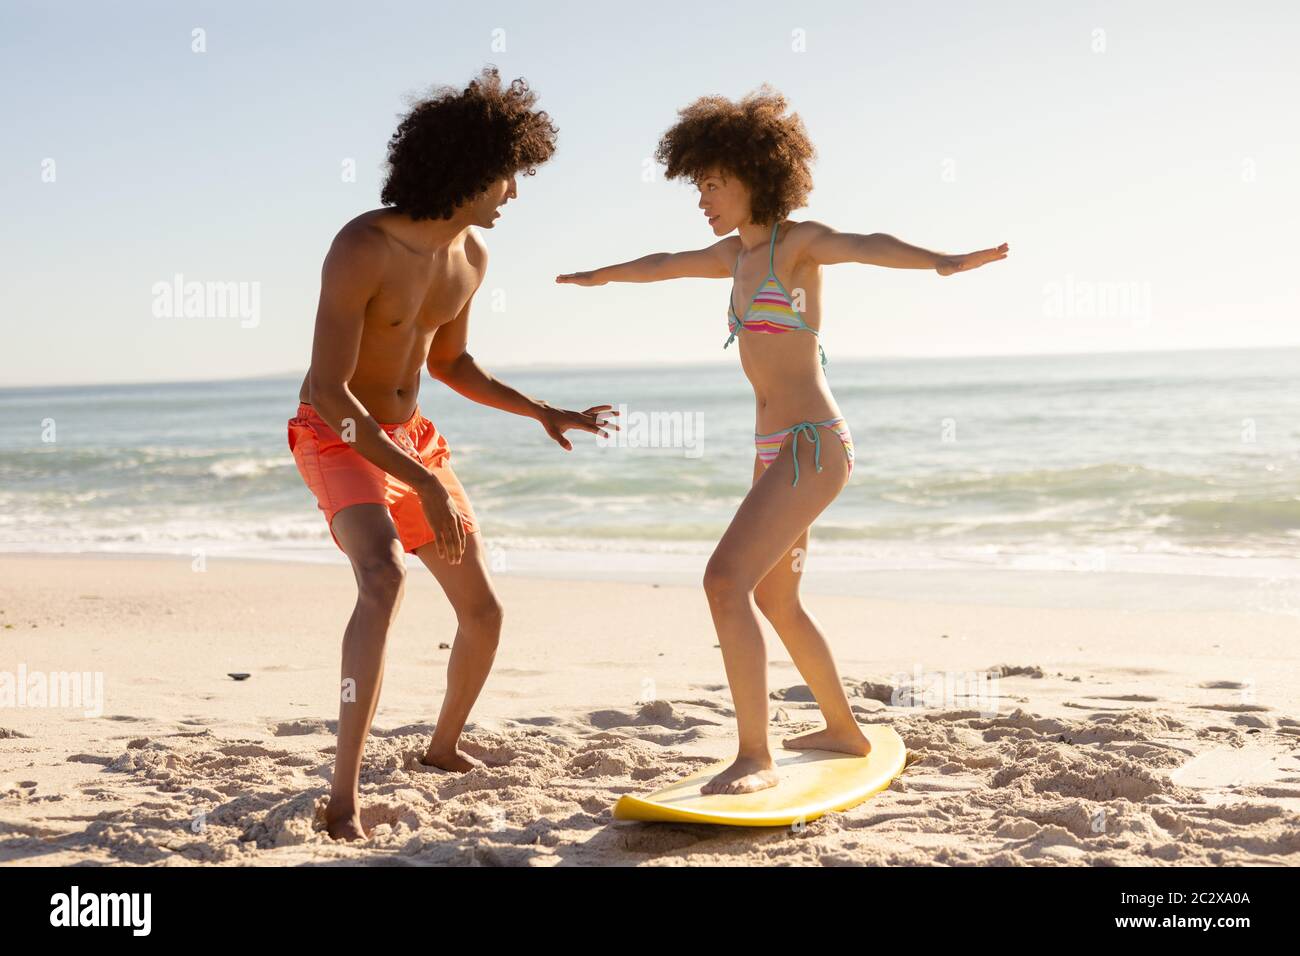 Young couple surfing on a beach Stock Photo